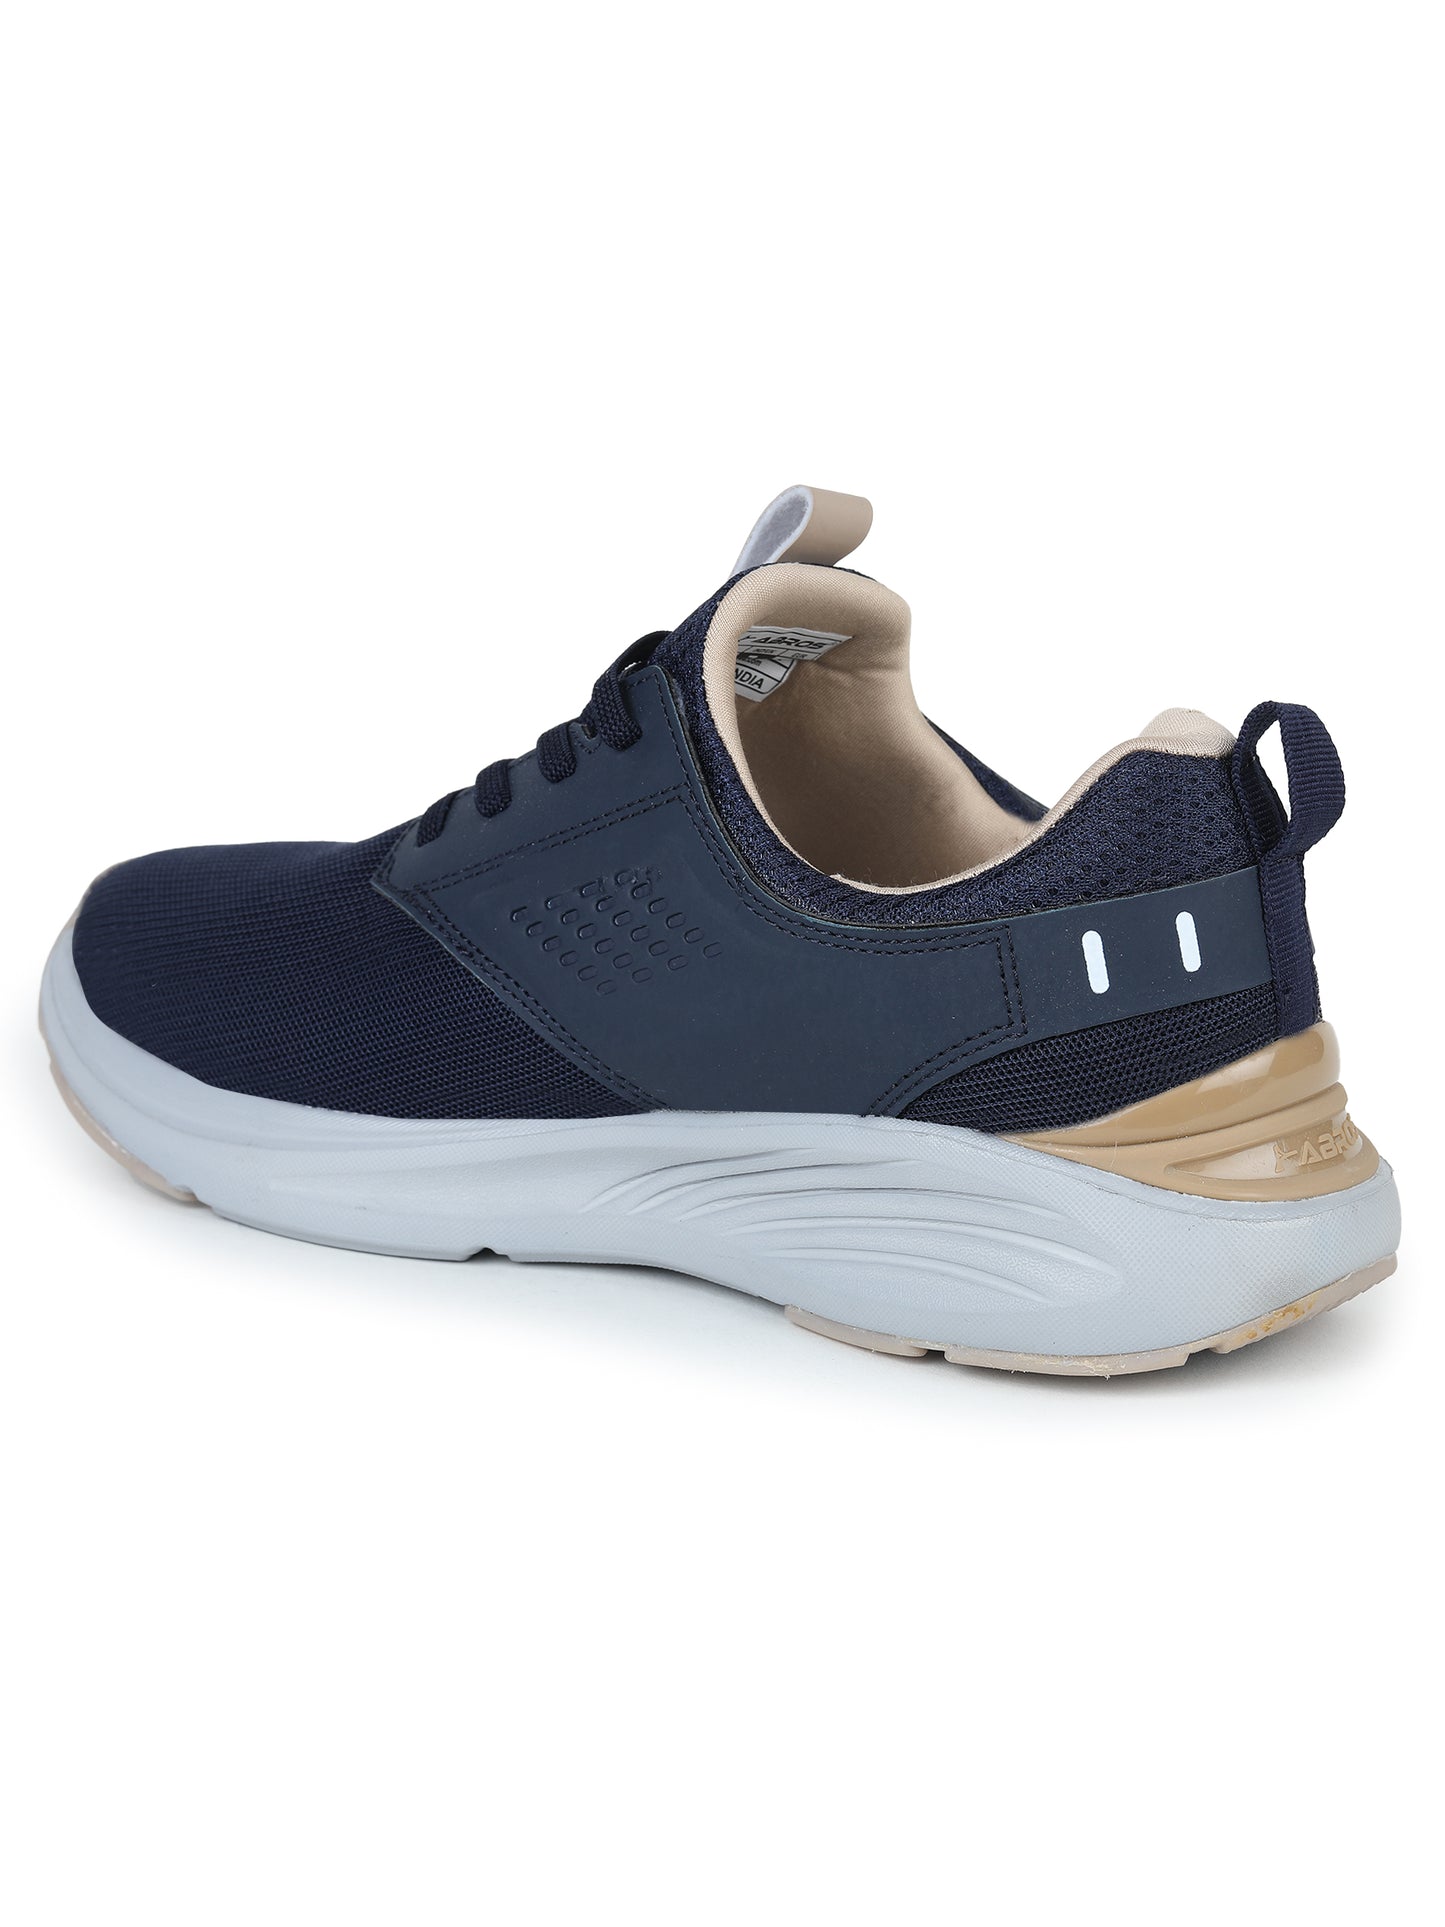 ABROS Miracle Sports Shoes For Men